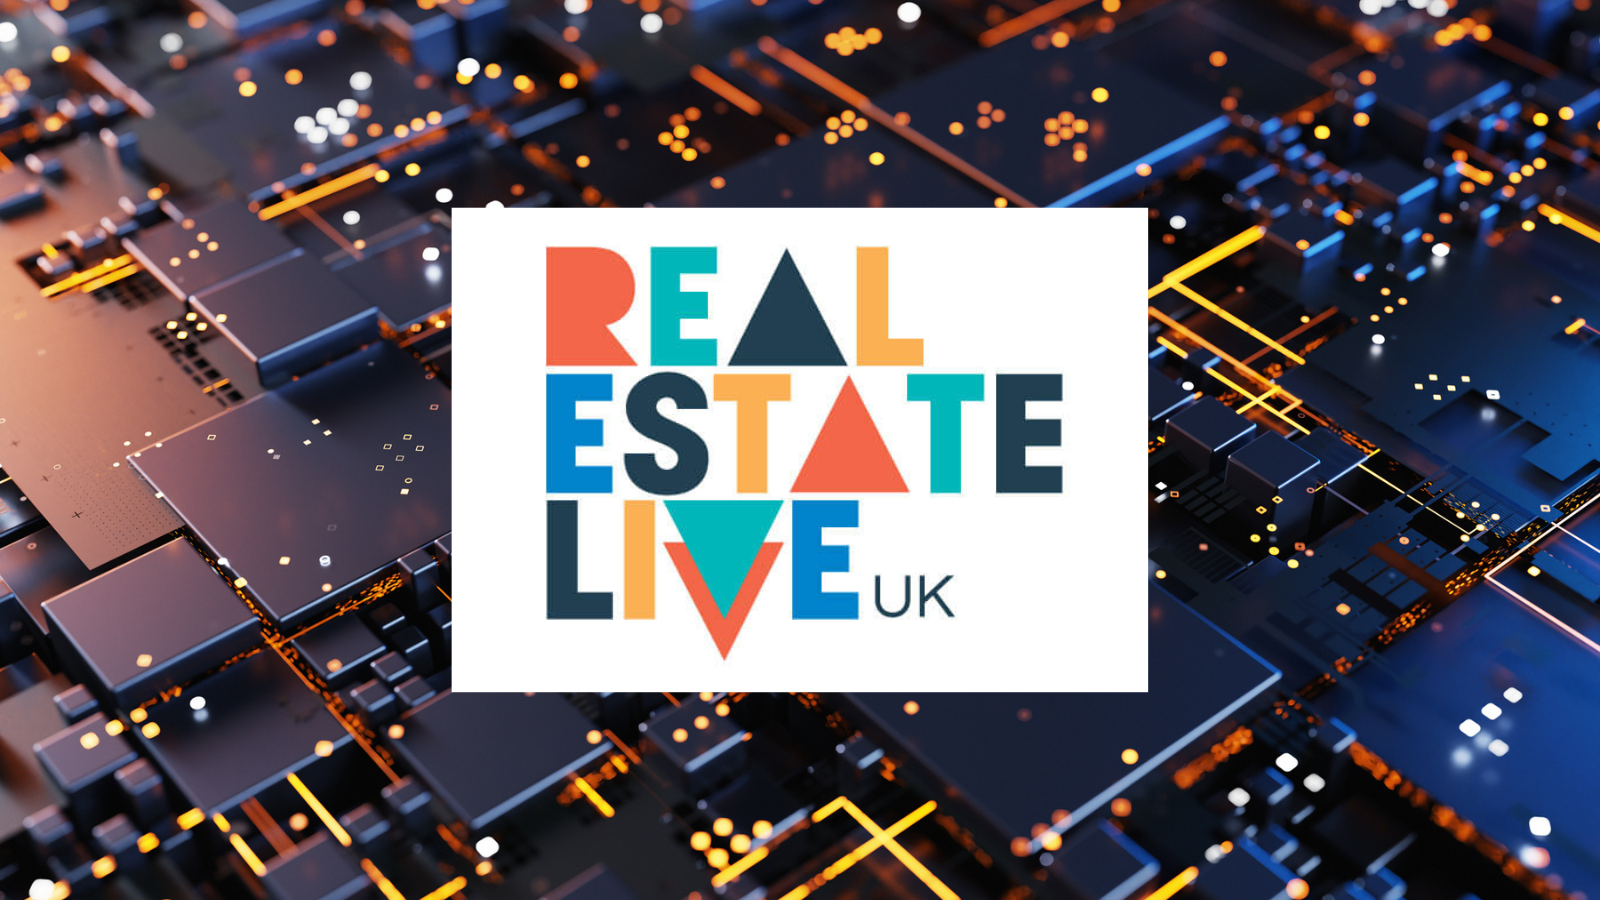 Liverpool at Real Estate Live